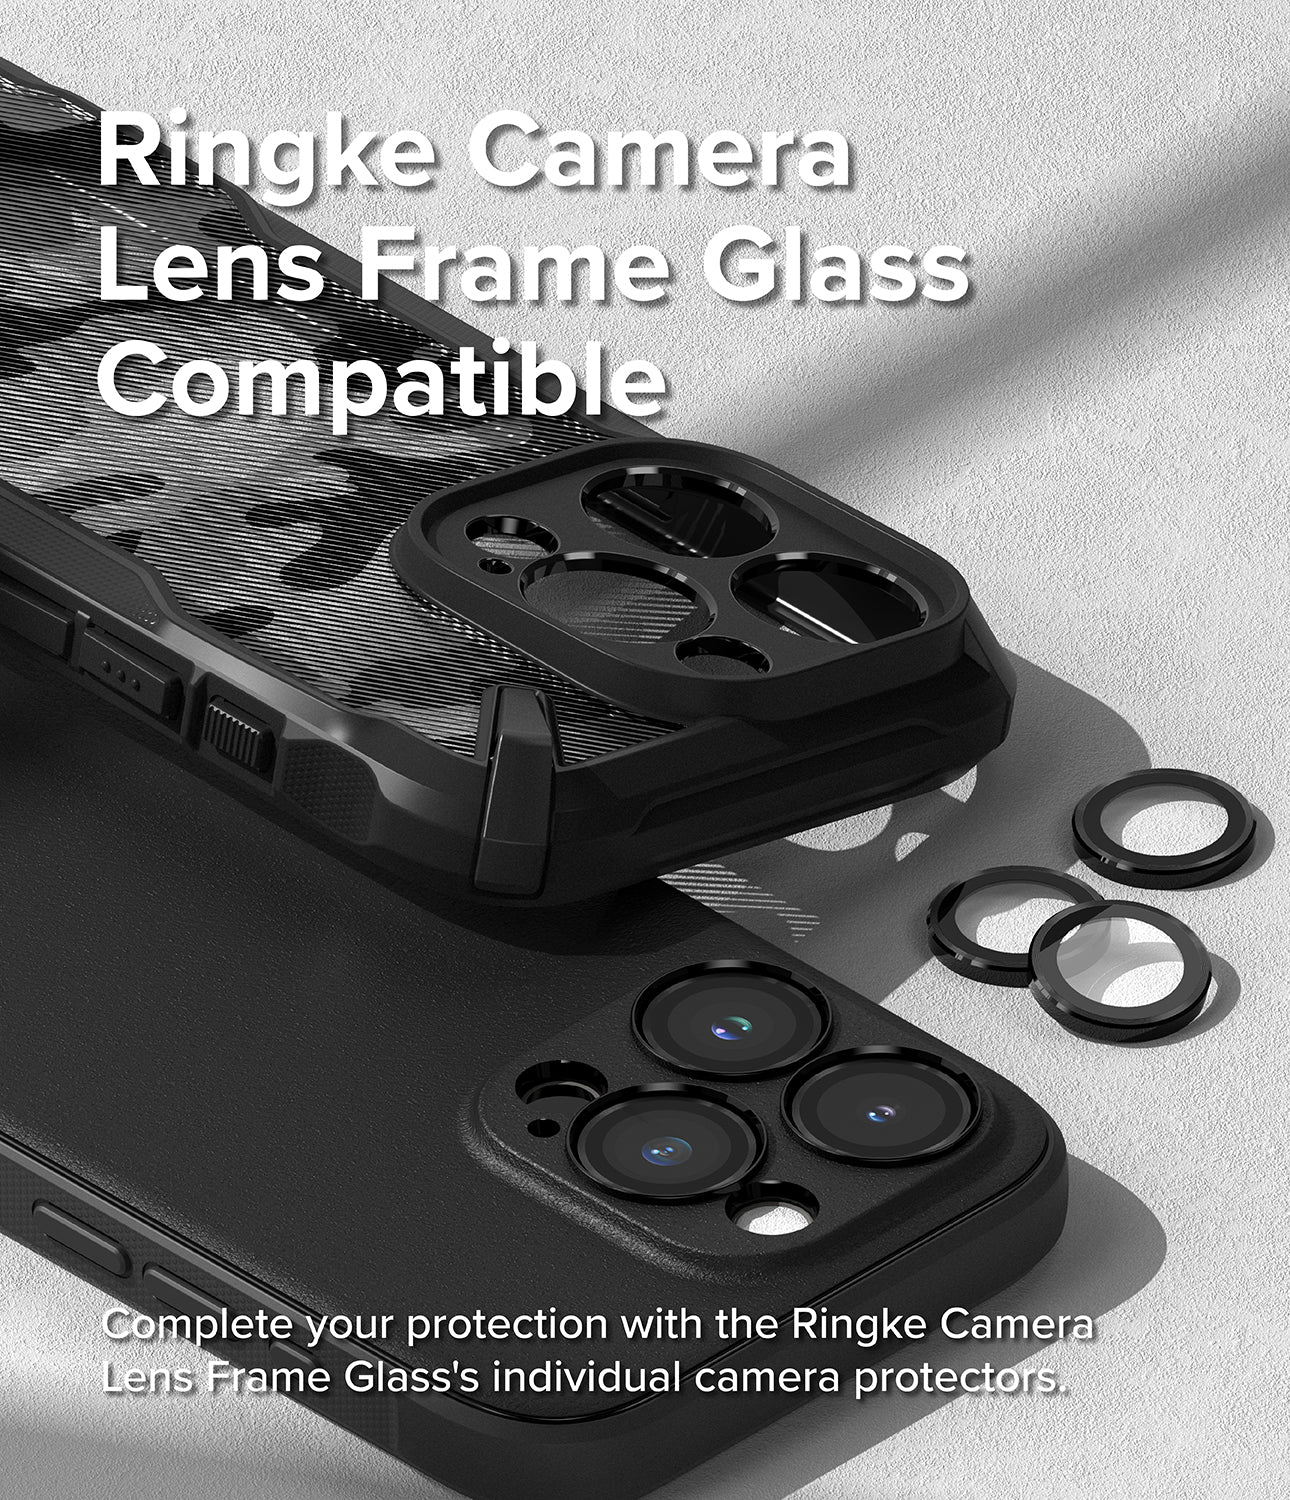 iPhone 15 Pro Max Case | Onyx - Gray - Ringke Camera Lens Frame Glass Compatible. Complete your protection with the Ringke Camera Lens Frame Glass' individual camera protectors.